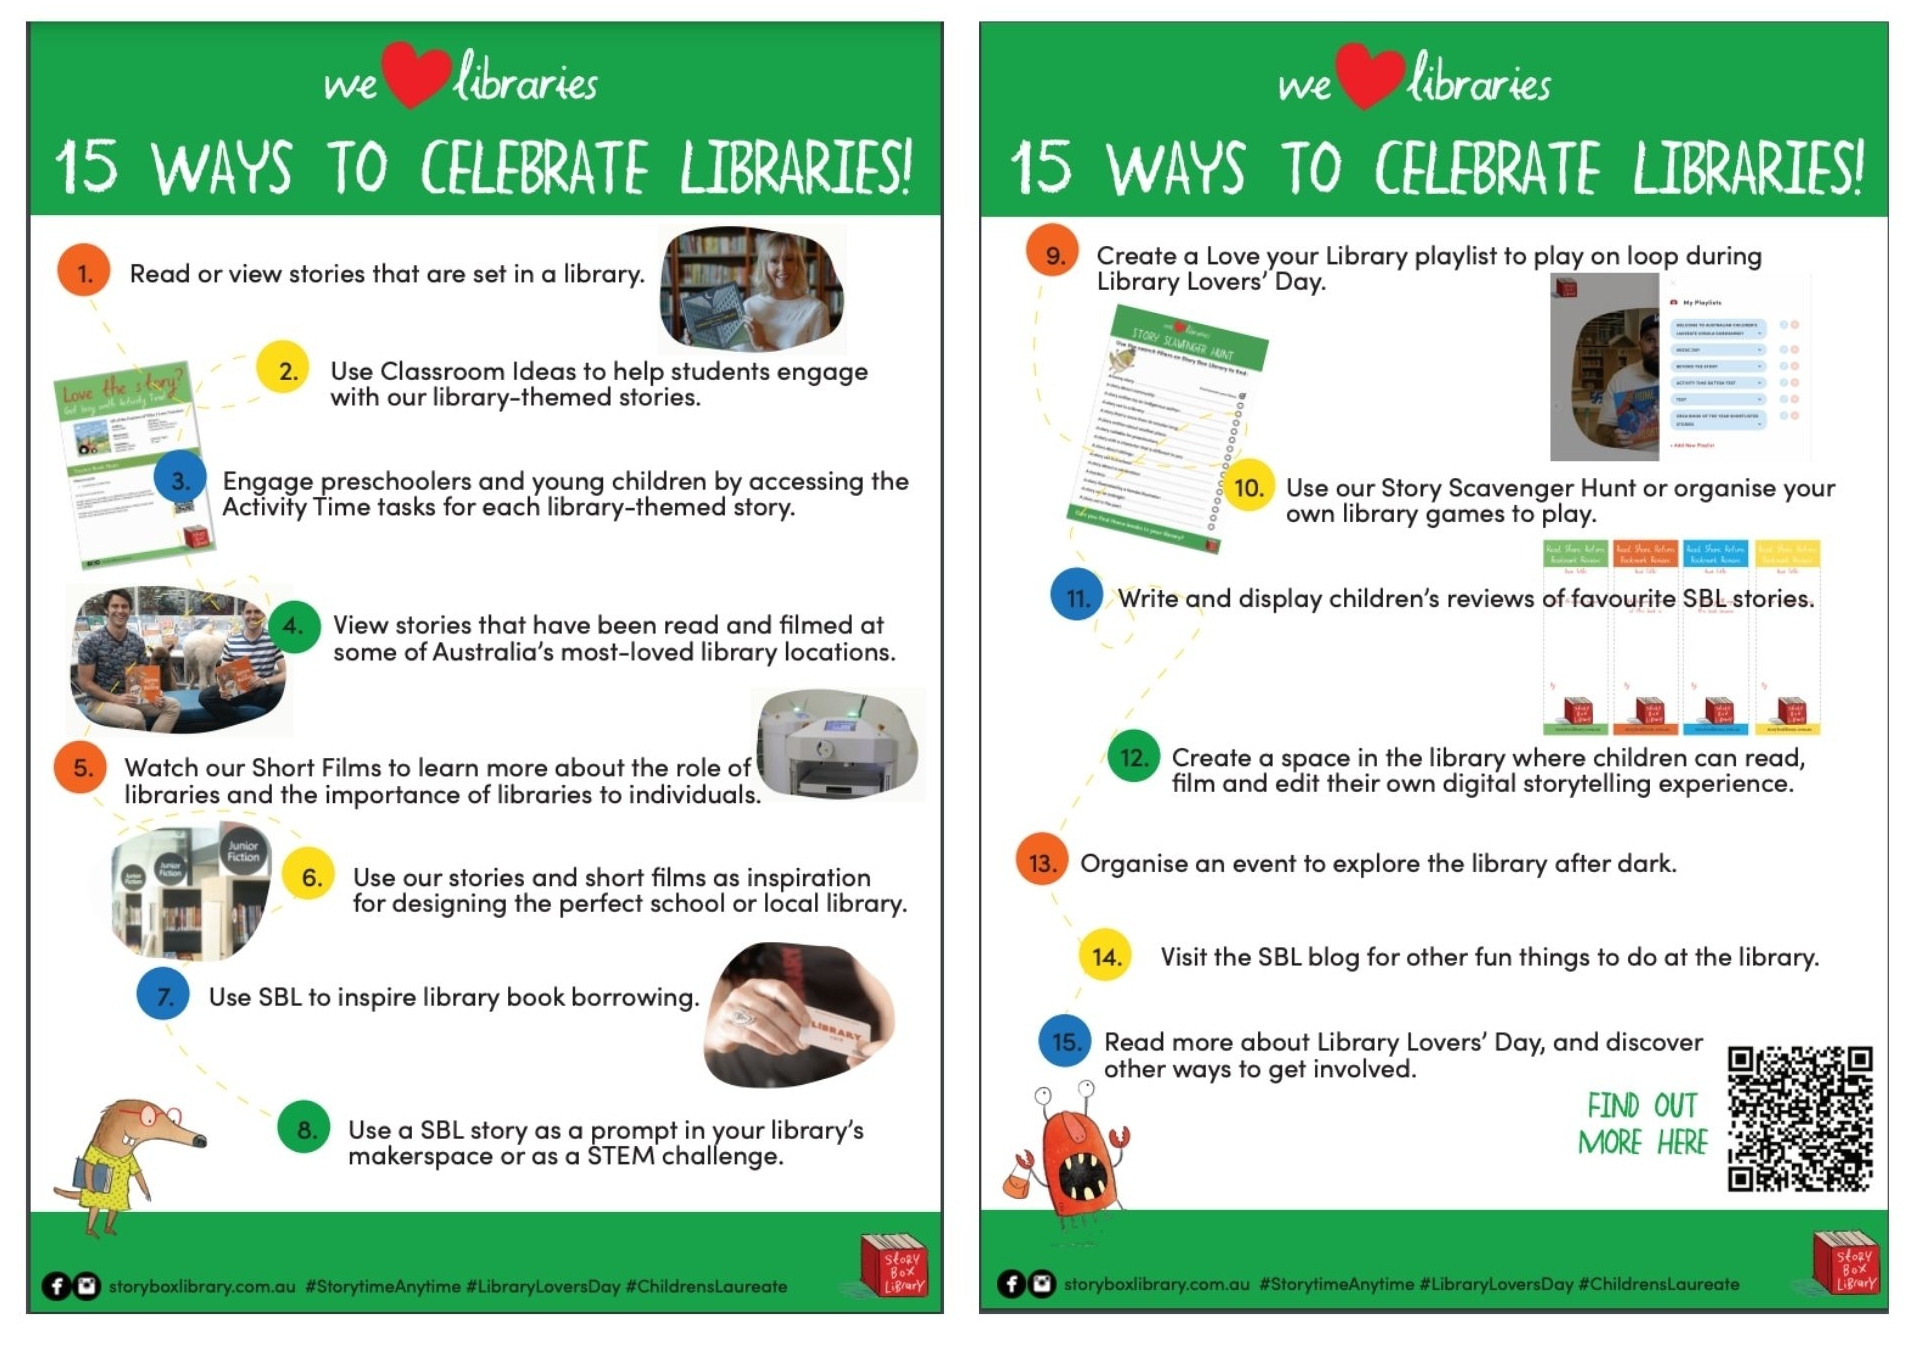 Story Box Library Love Your Library 15 Ideas to Help You Celebrate